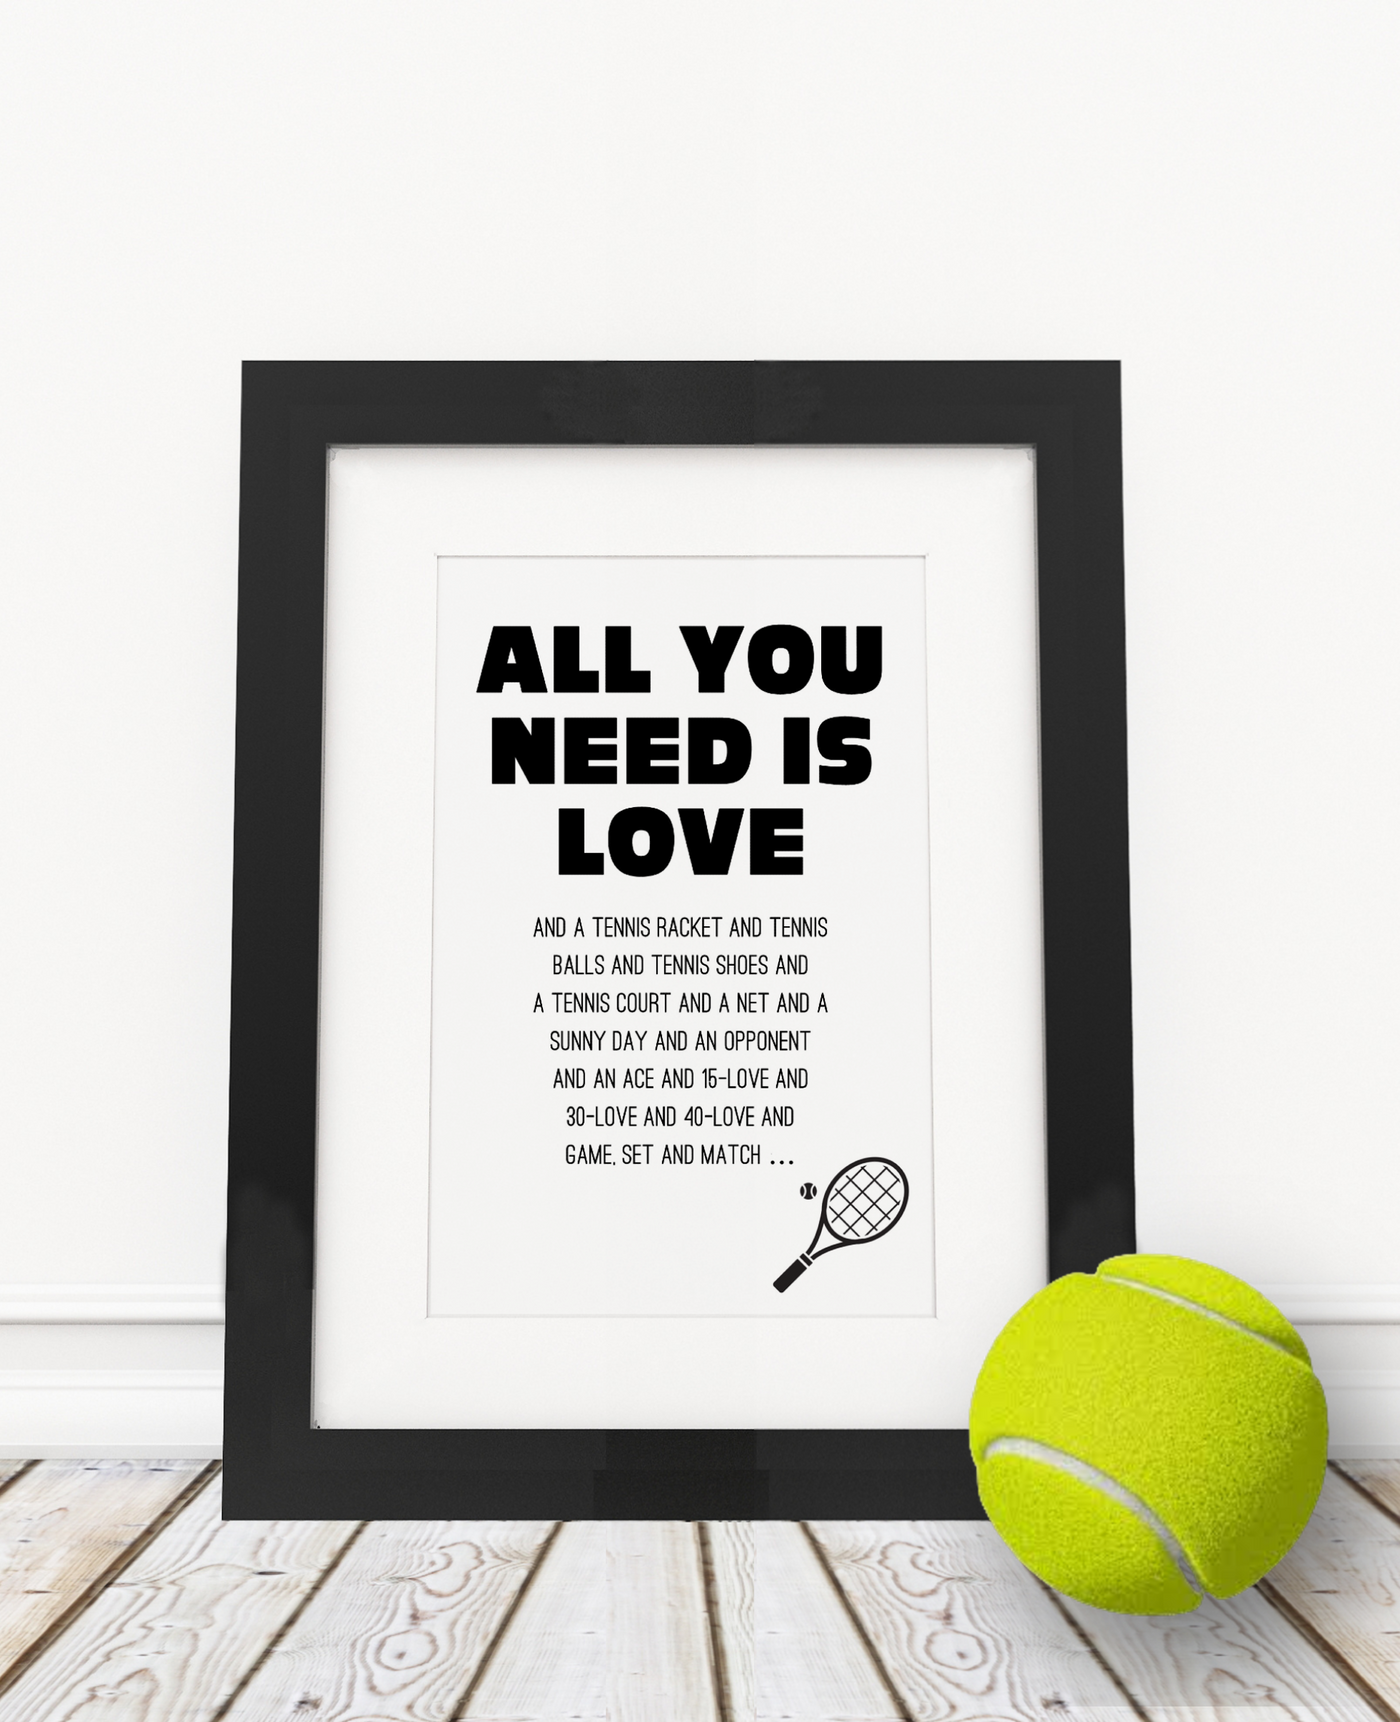 All you need is love/Tennis - Framed Print